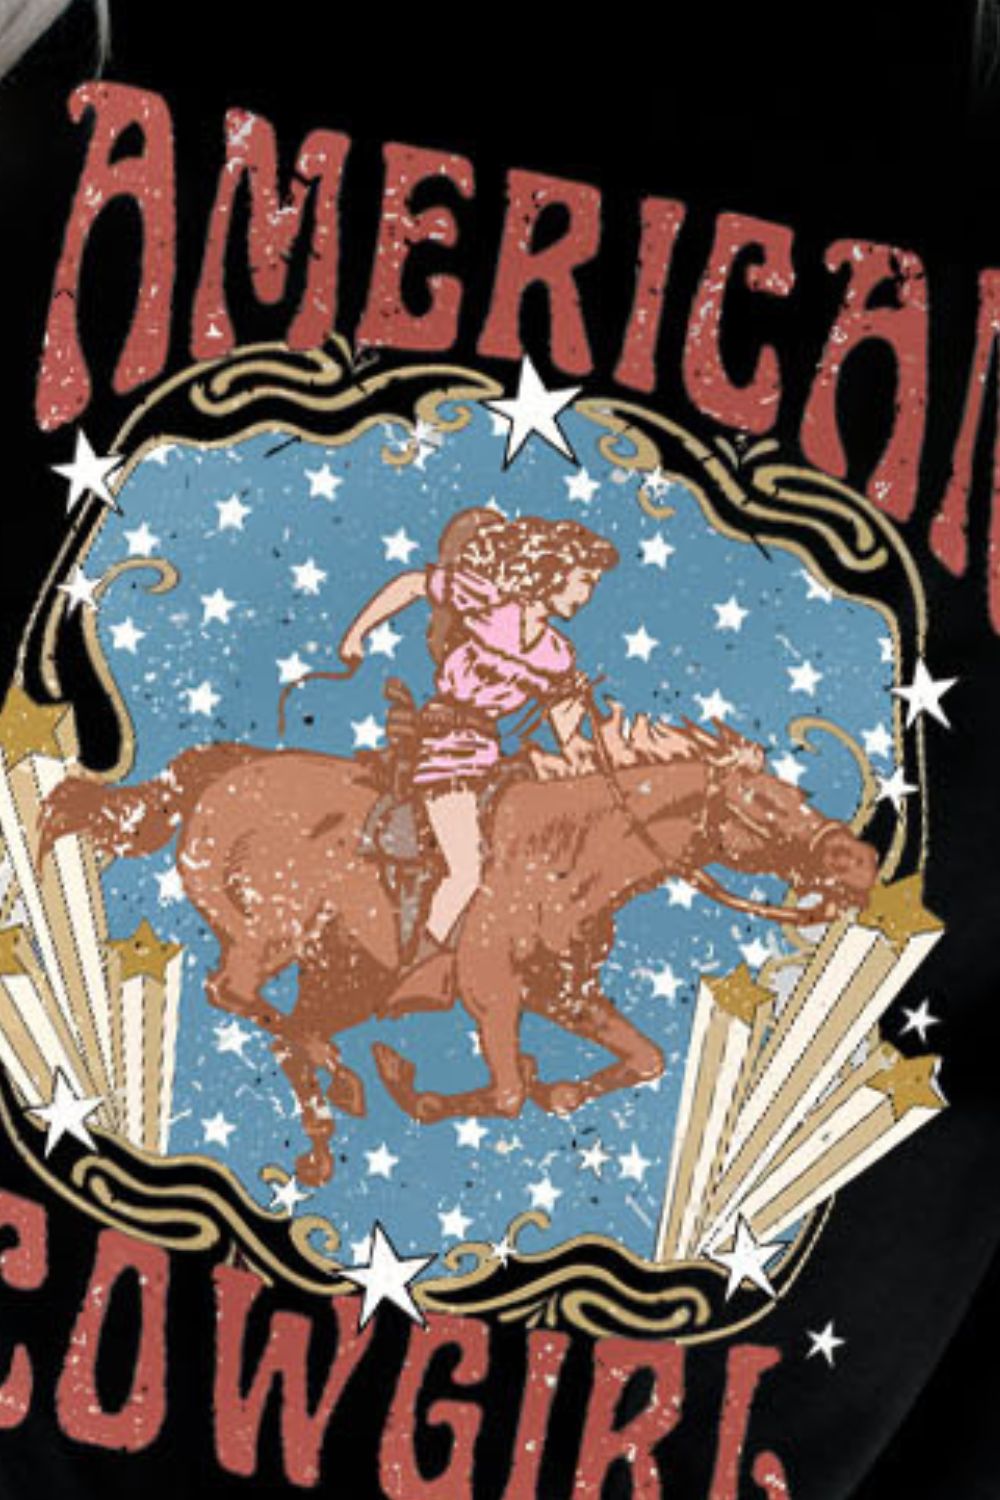 AMERICAN COWGIRL Graphic Short Sleeve Tee - Spruced Roost